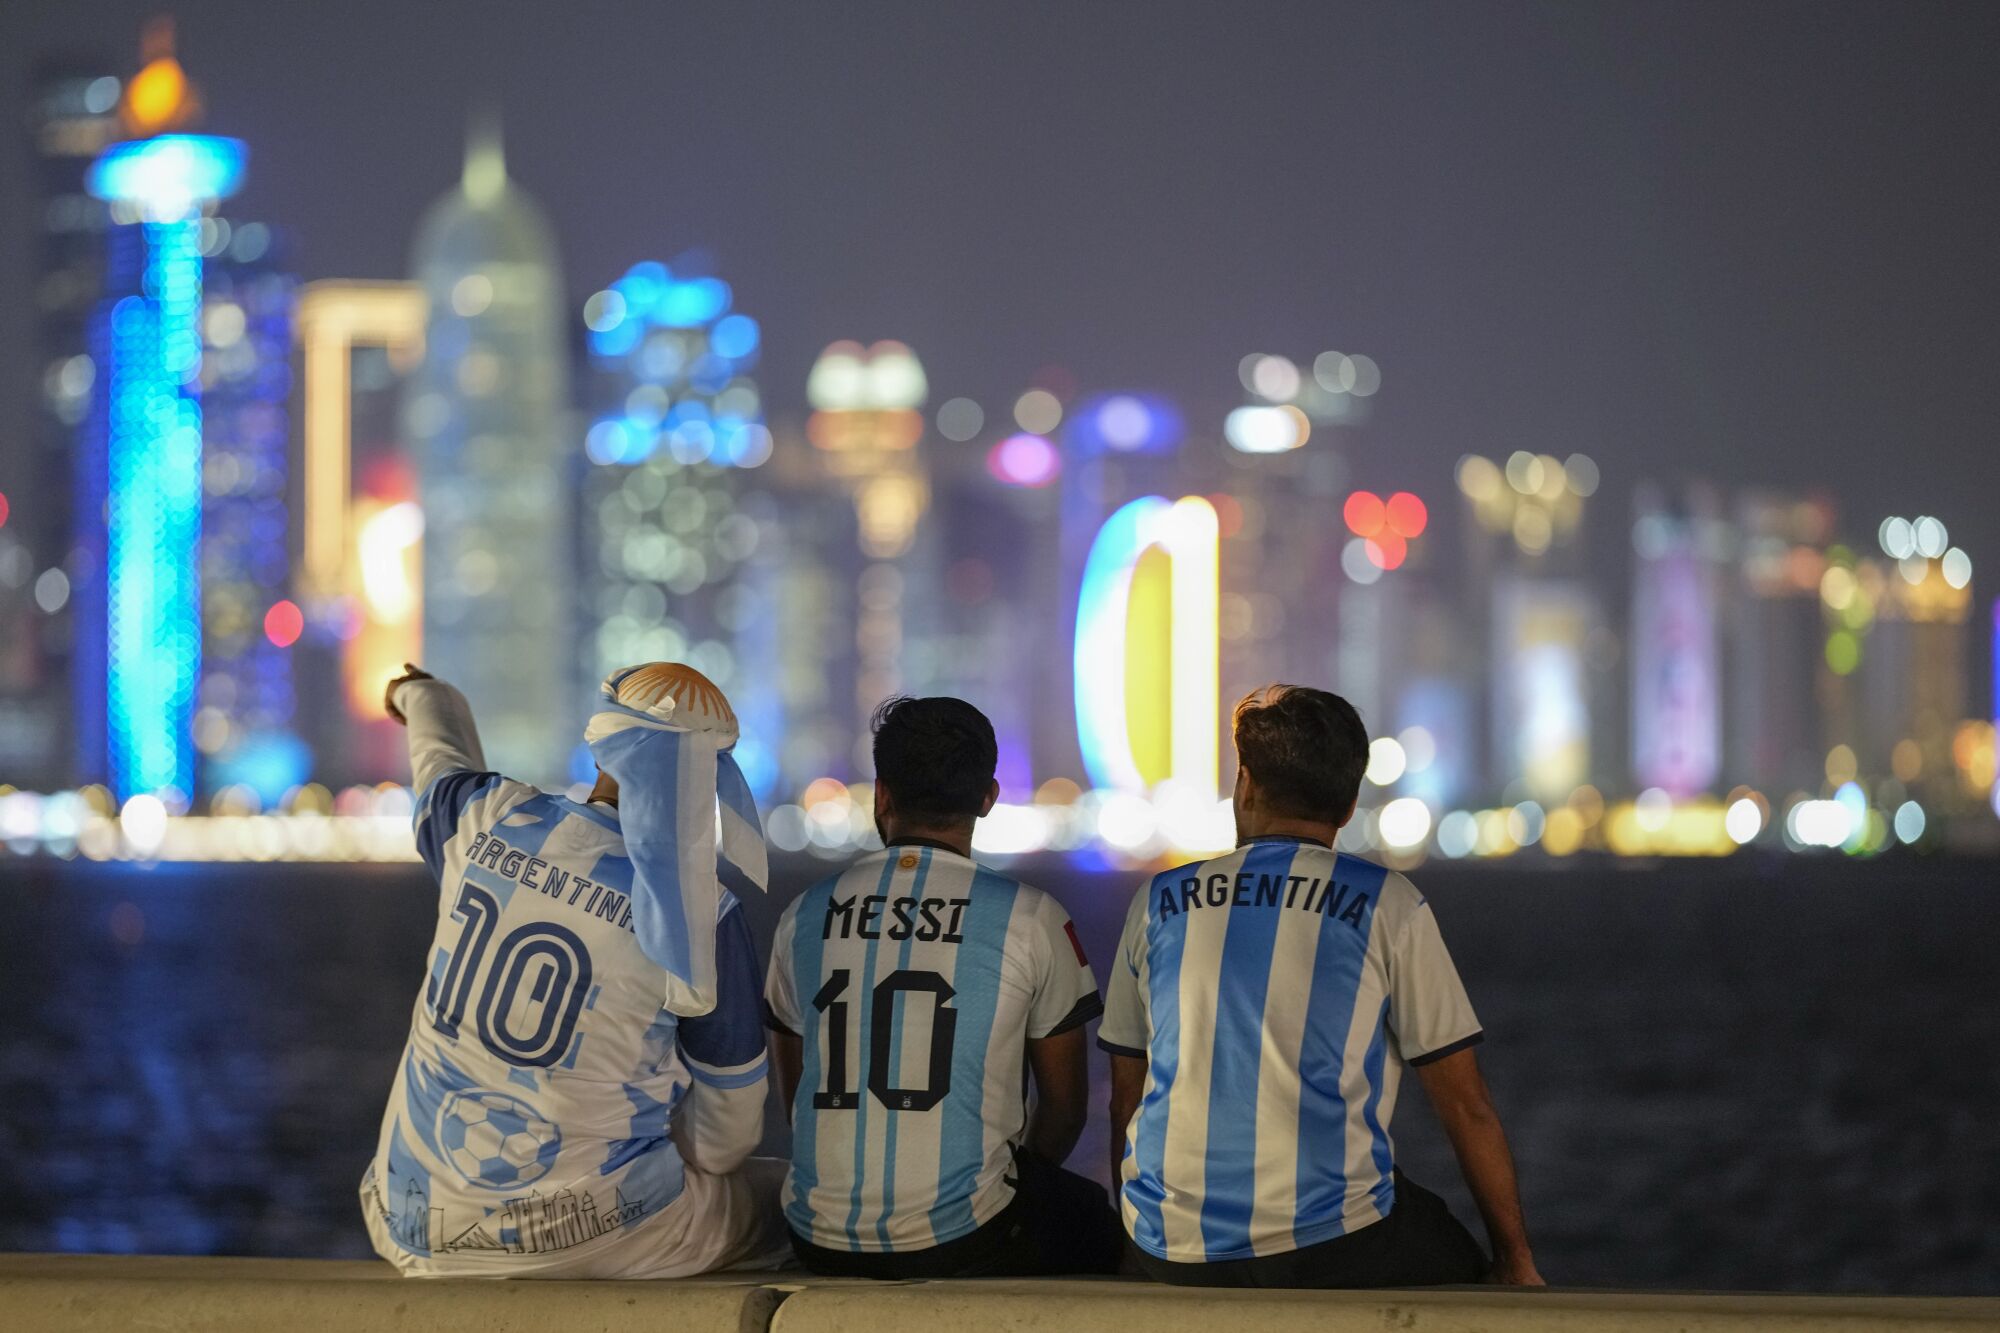 Fans of Argentina sit on Doha nner)